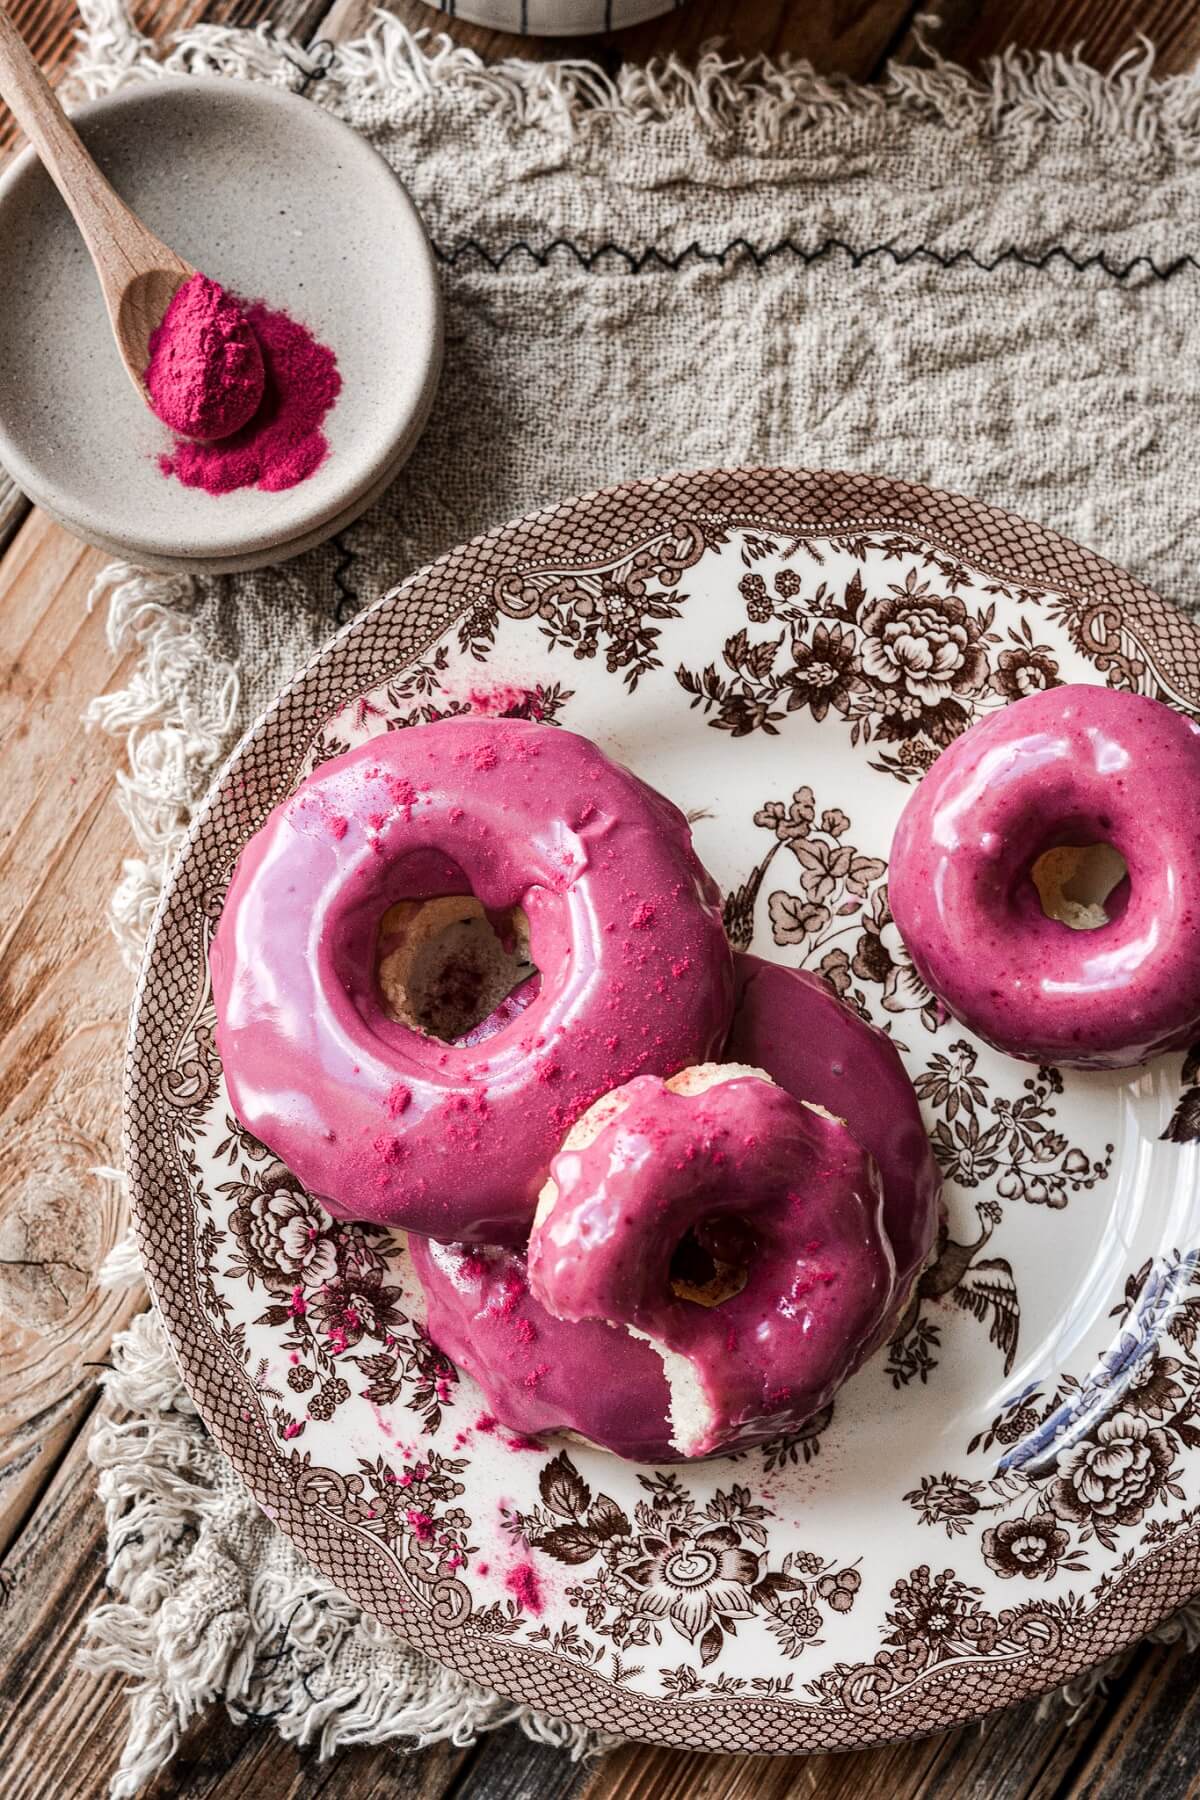 Baked blueberry donuts on a brown and white floral plate.